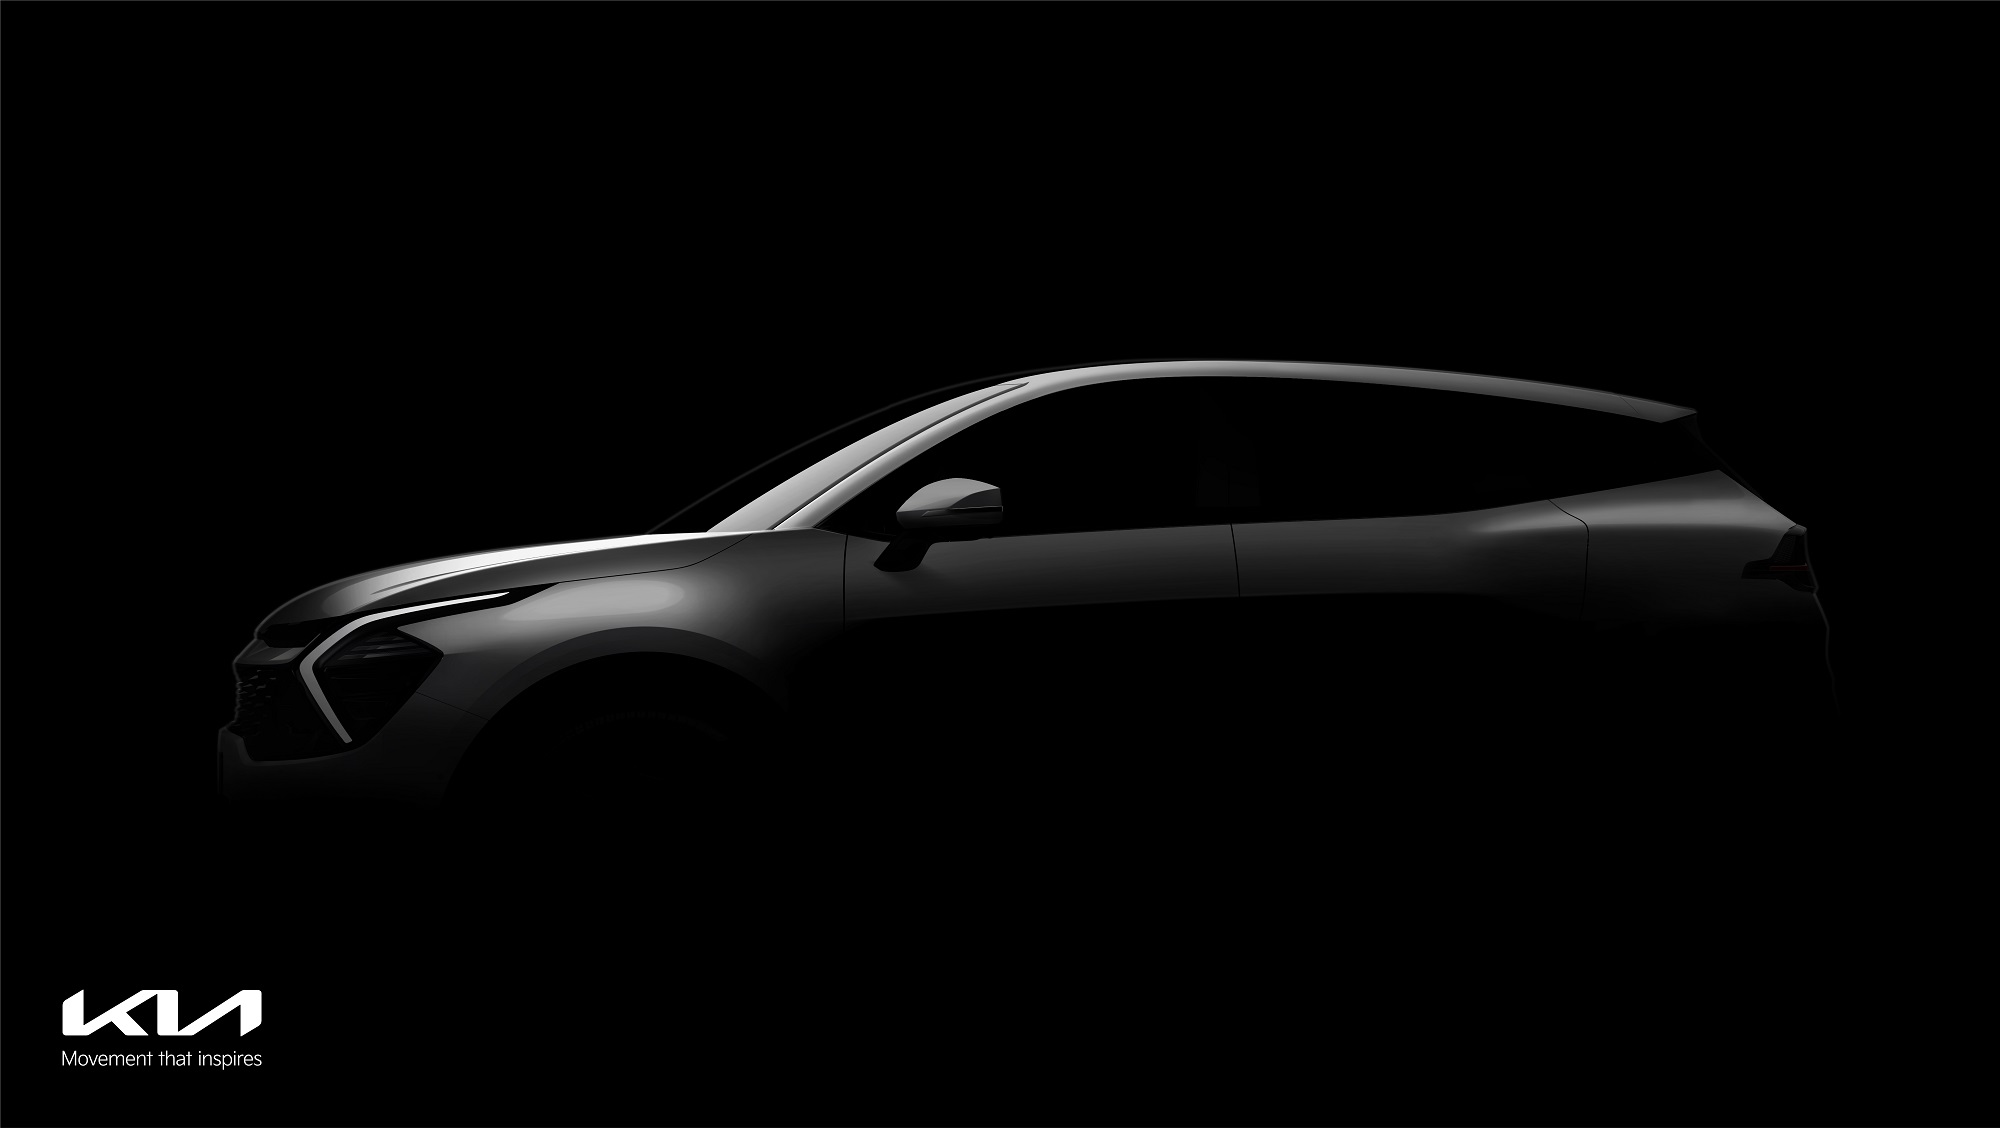 Kia teases first images of all-new Sportage